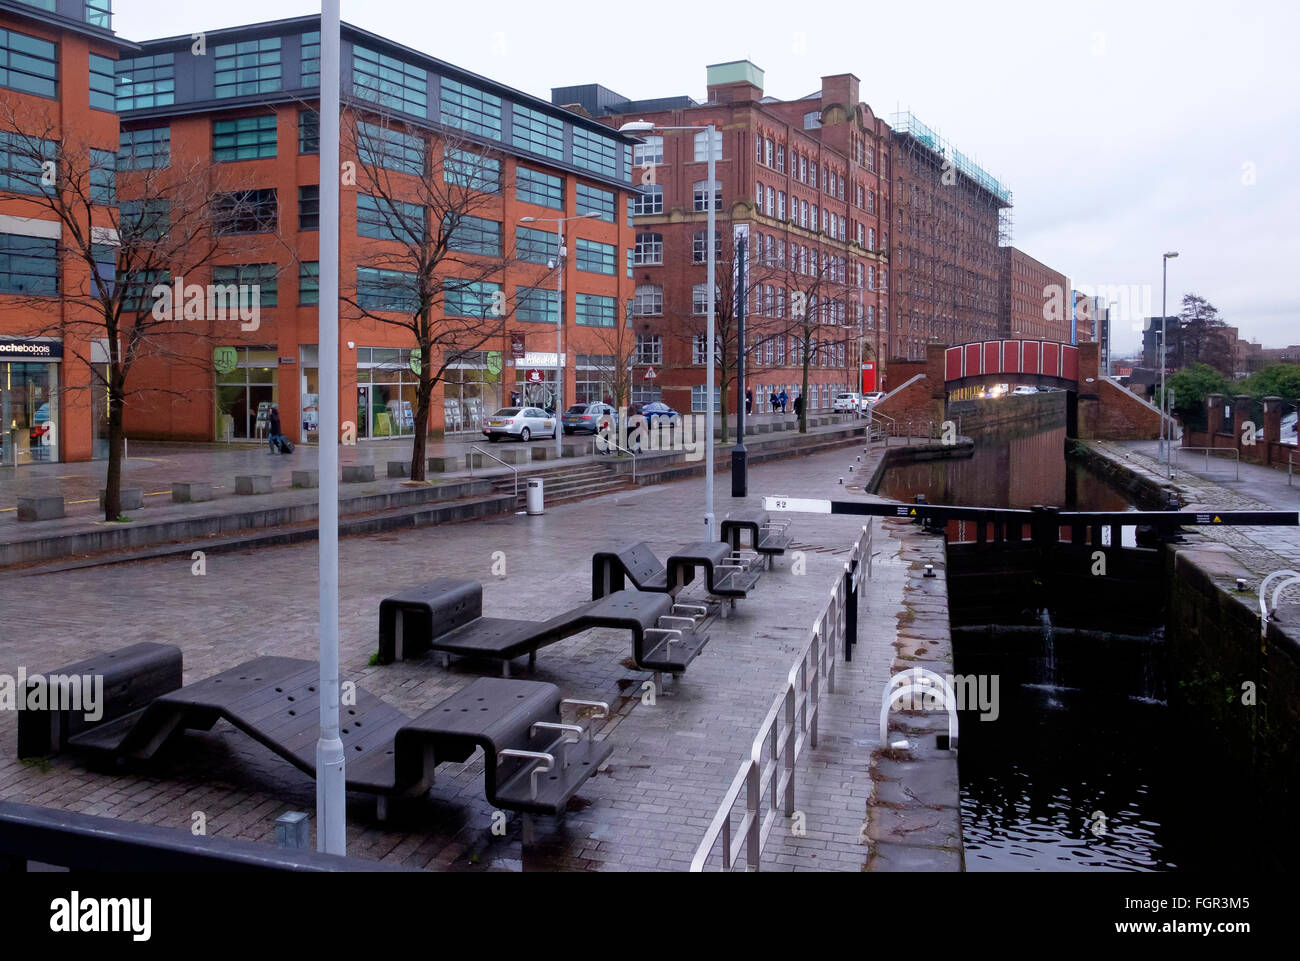 Manchester, UK - 17 February 2016: Rochdale Canal and industrial building heritage on Red Hill Street, central Manchester Stock Photo